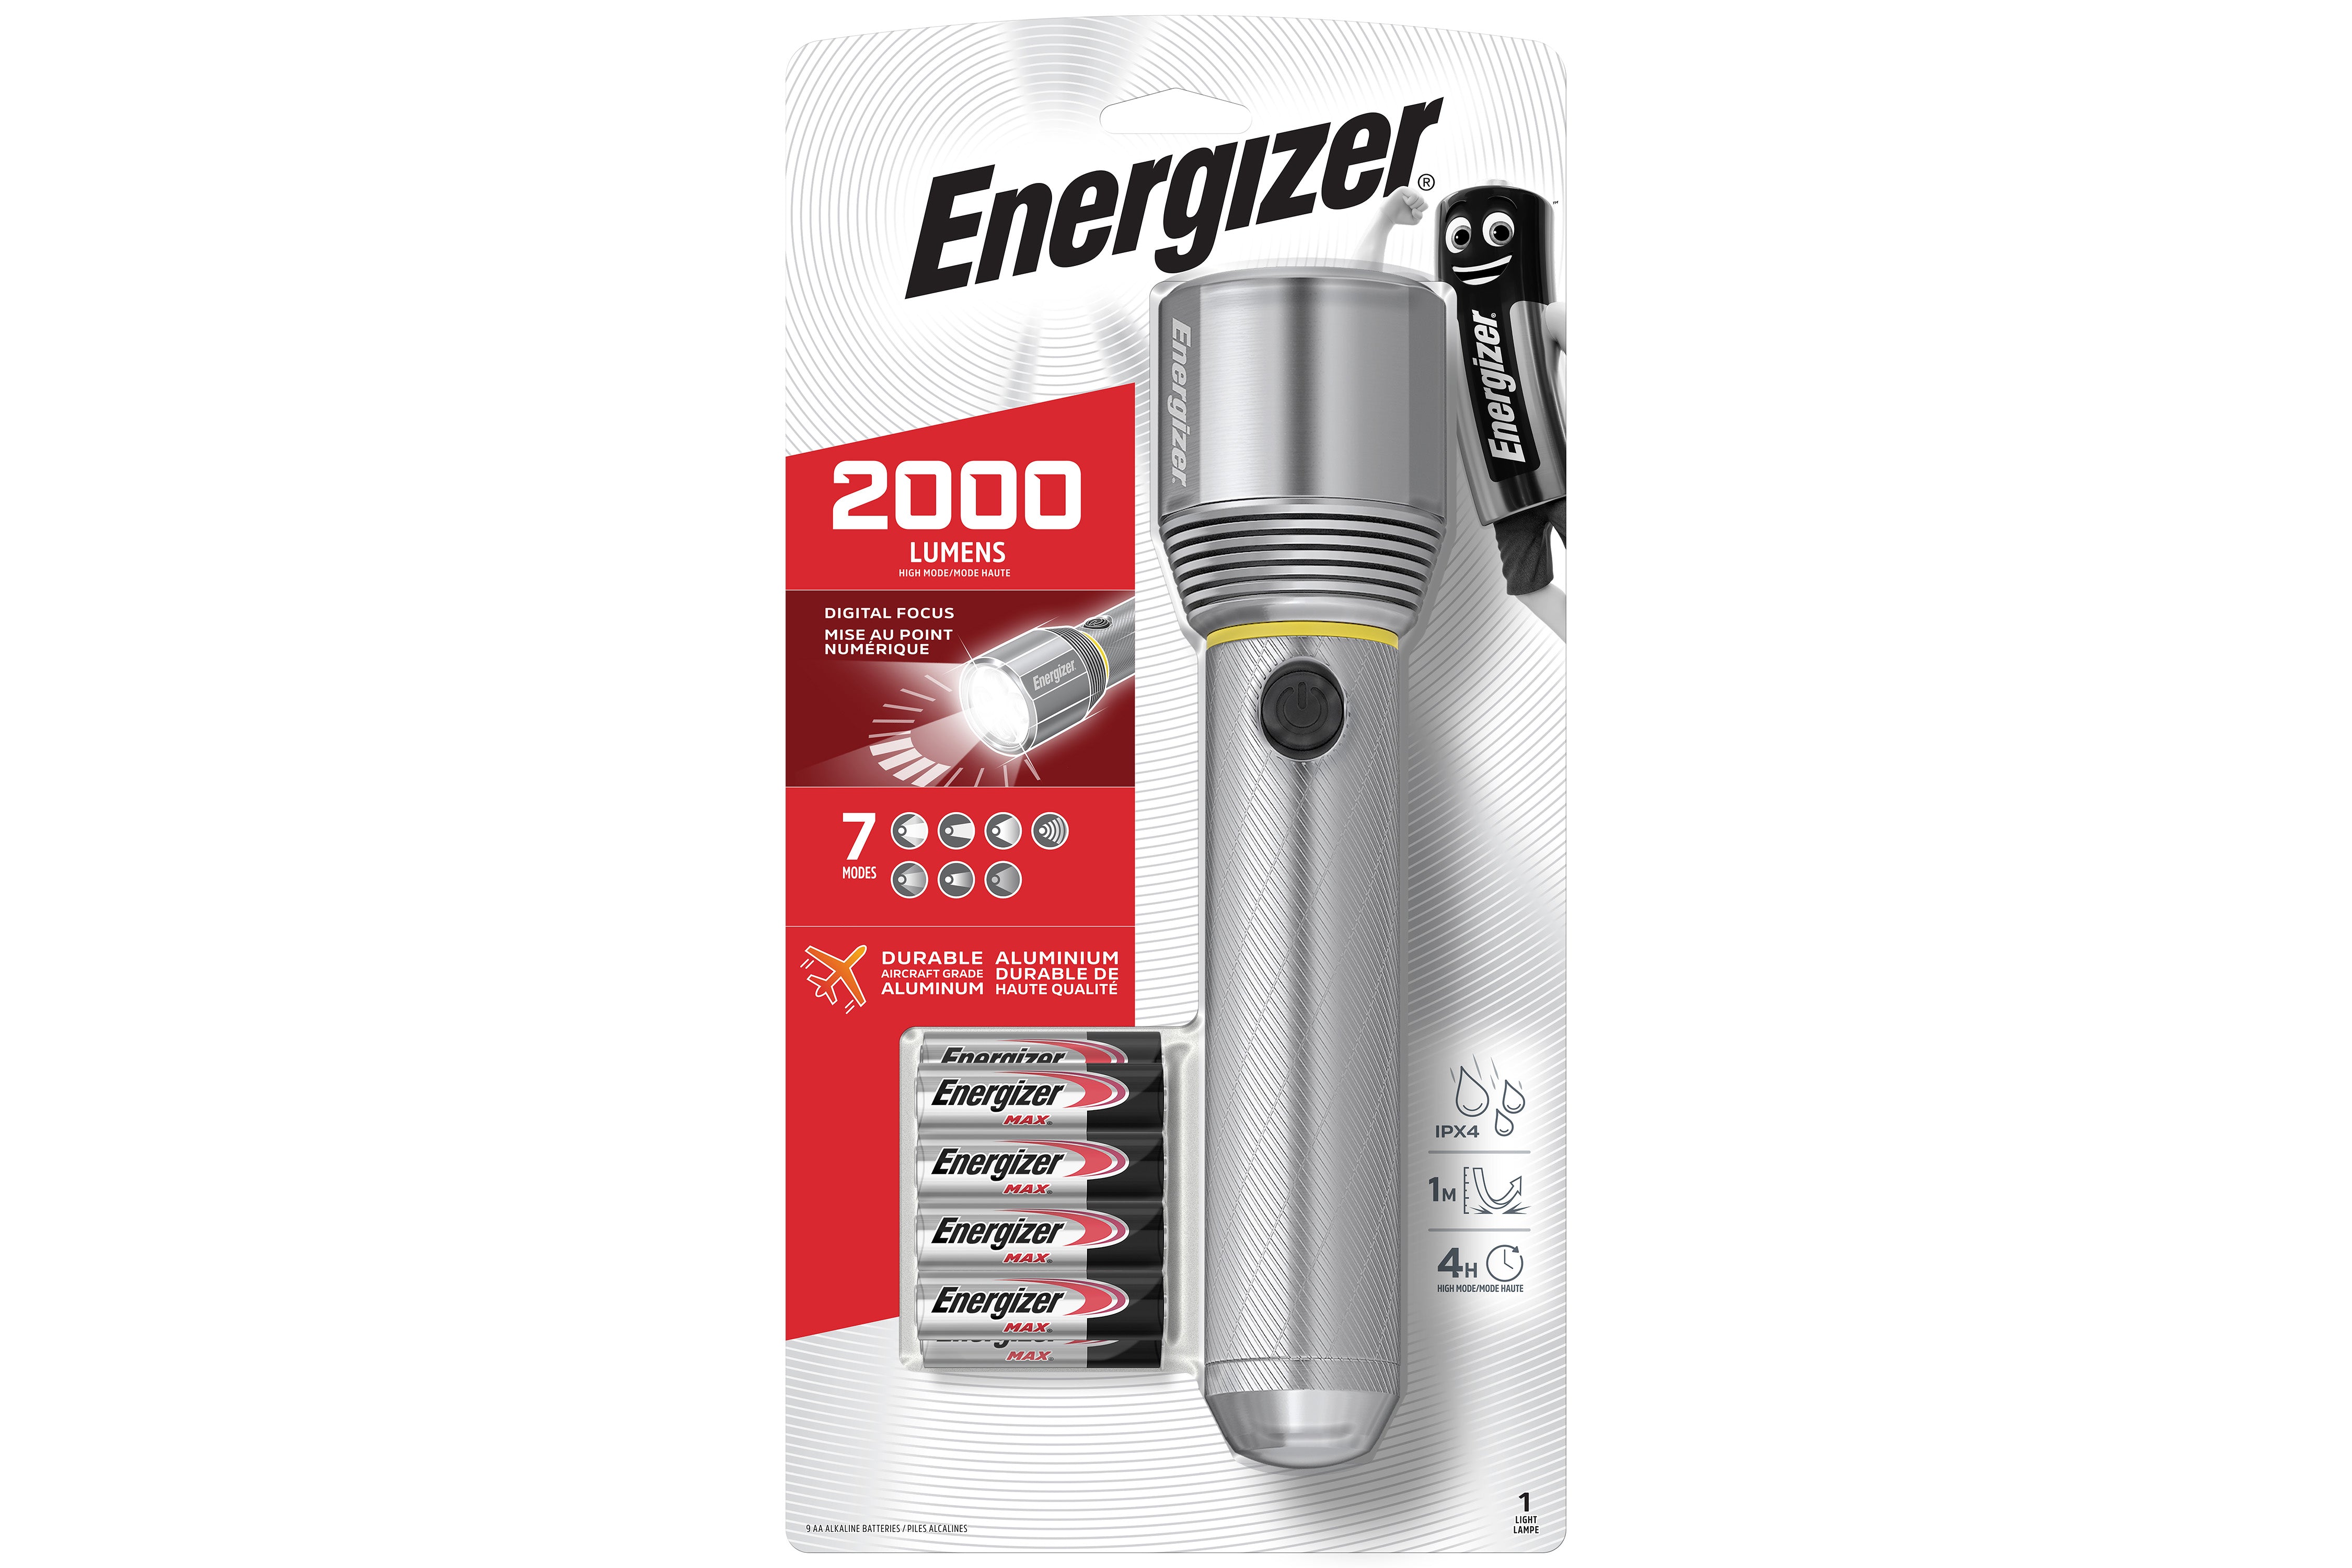 Energizer Metal Case 2000 Lumens LED Torch with 9x AA Batteries